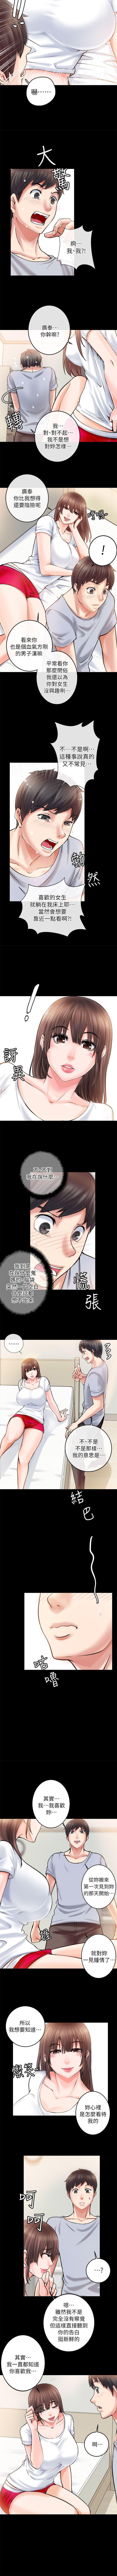 Sex Party 觸不到的她 1-39 Morocha - Page 10